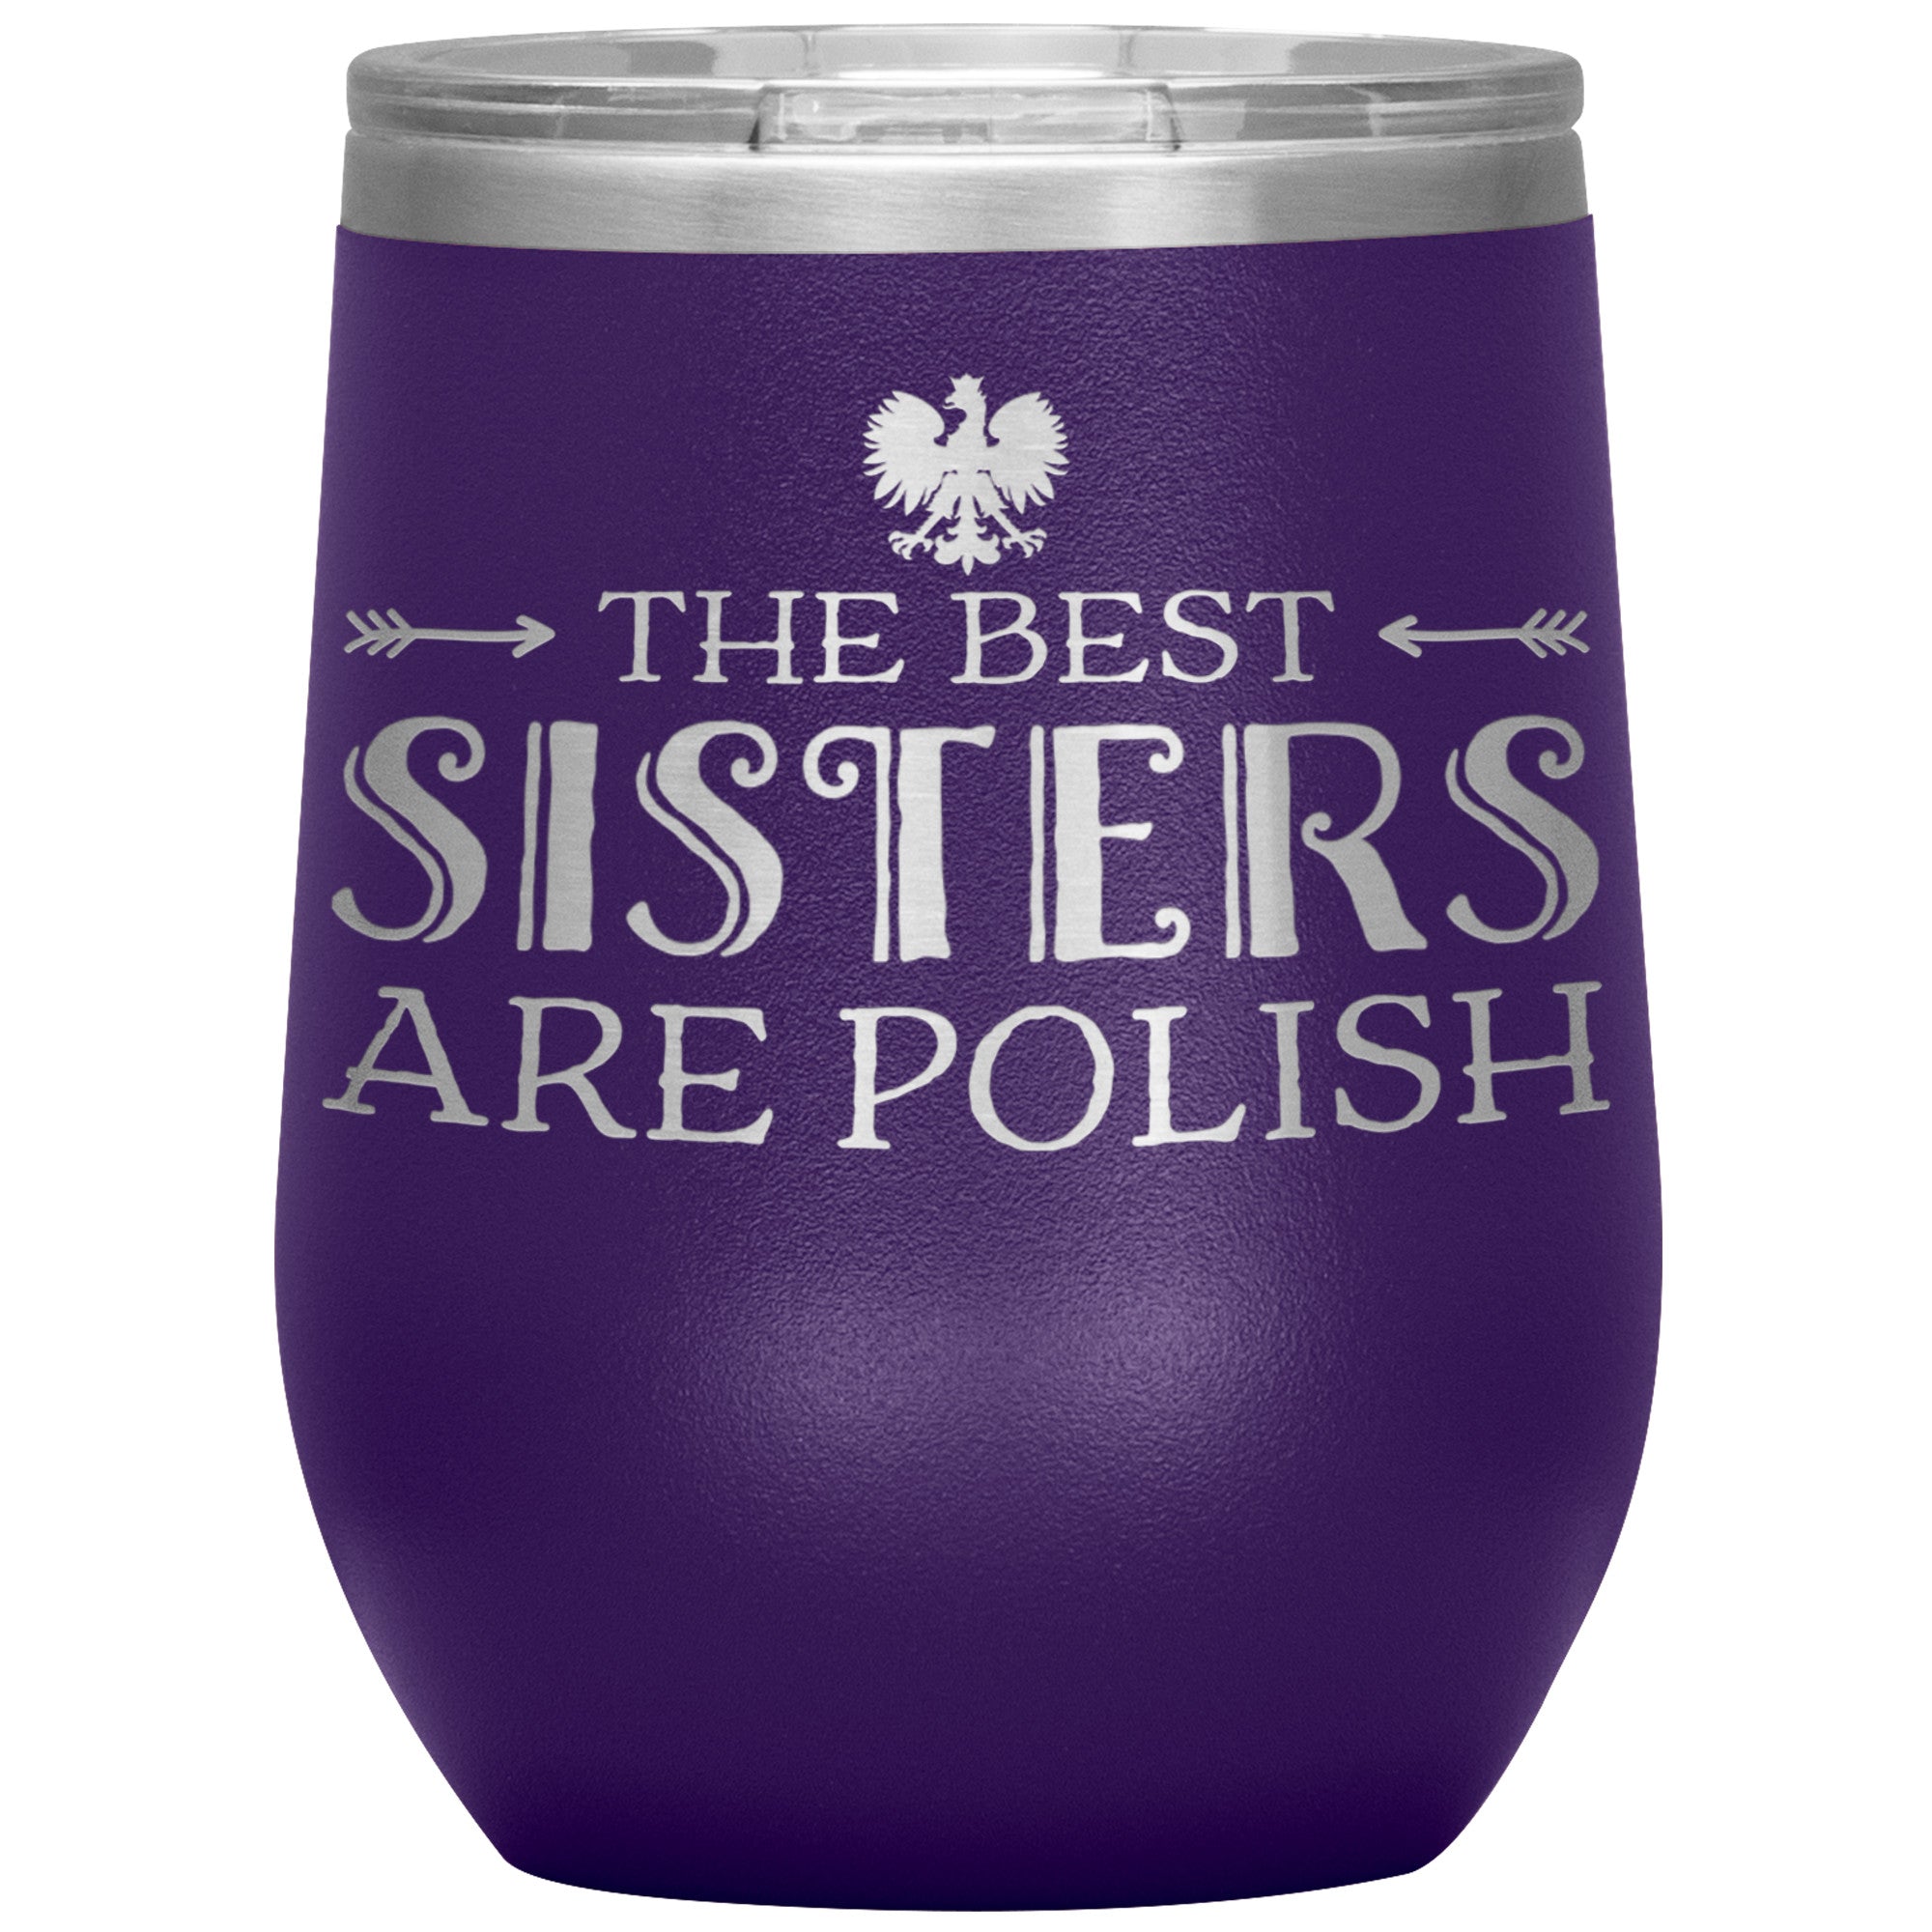 The Best Sisters Are Polish Insulated Wine Tumbler Tumblers teelaunch Purple  